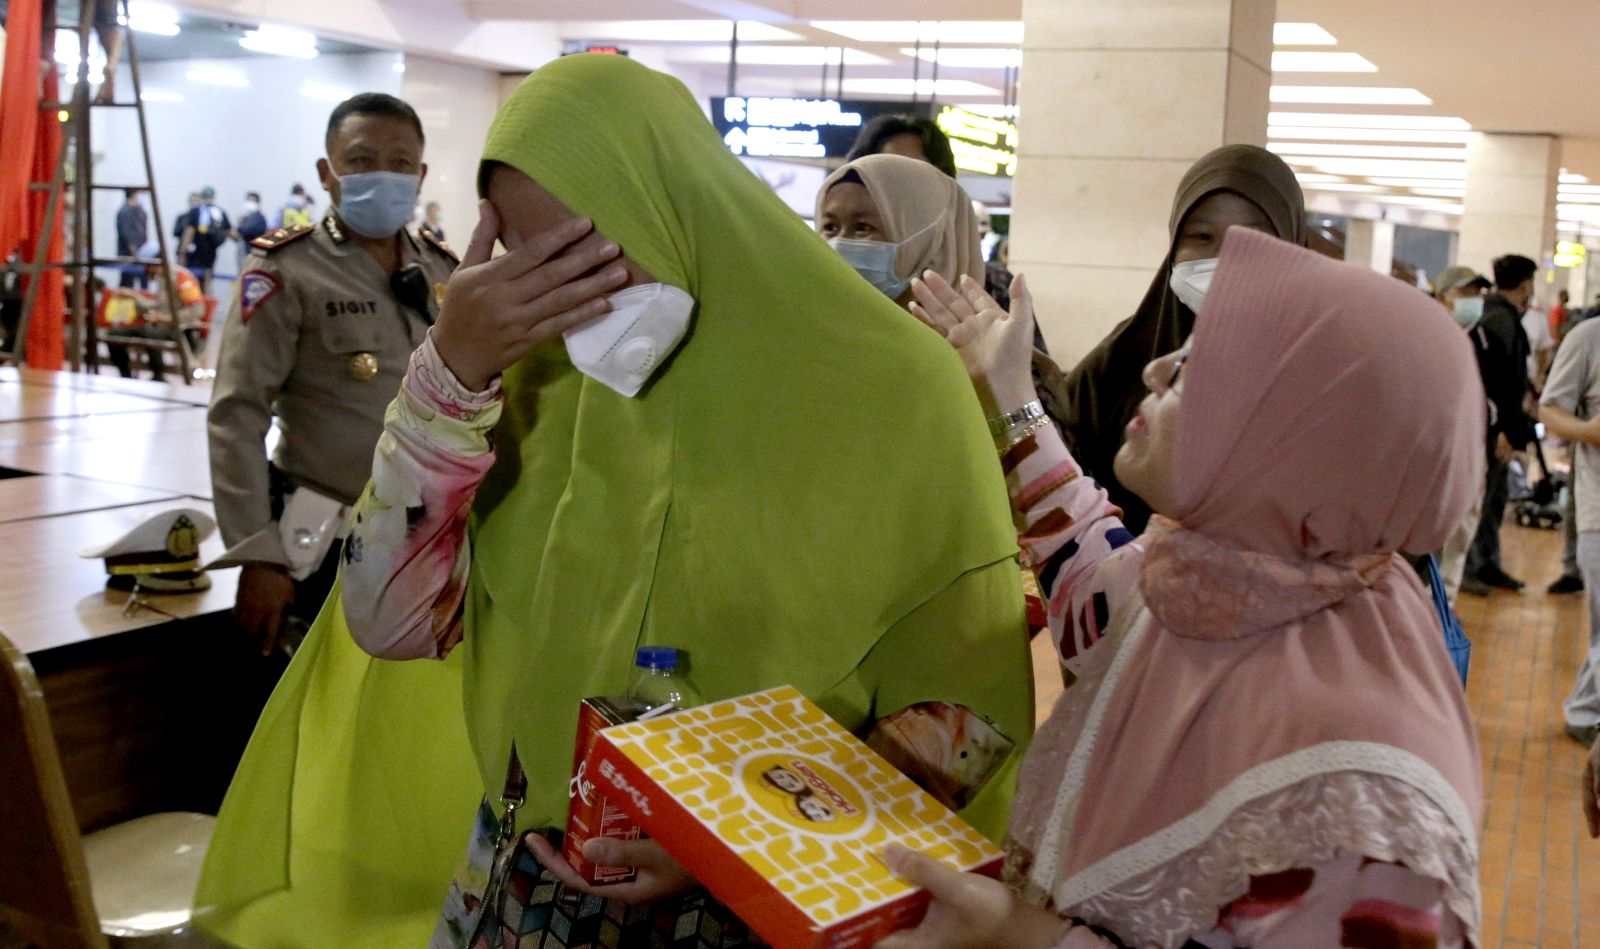 epa08928609 Relatives of Sriwijaya Air plane passengers arrive at the crisis center in Soekarno-Hatta International Airport following the report that Sriwijaya Air plane flight SJ182 lost contact shortly after taking off, at Tanjung Priok Port in Jakarta, Indonesia, 09 January 2021. According to an airline spokesperson, contact to Sriwijaya Air flight SJ182 was lost on 09 January 2021 shortly after the aircraft took off from Jakarta International Airport while en route to Pontianak in West Kalimantan province. A search and rescue operation is under way.  EPA/MAST IRHAM